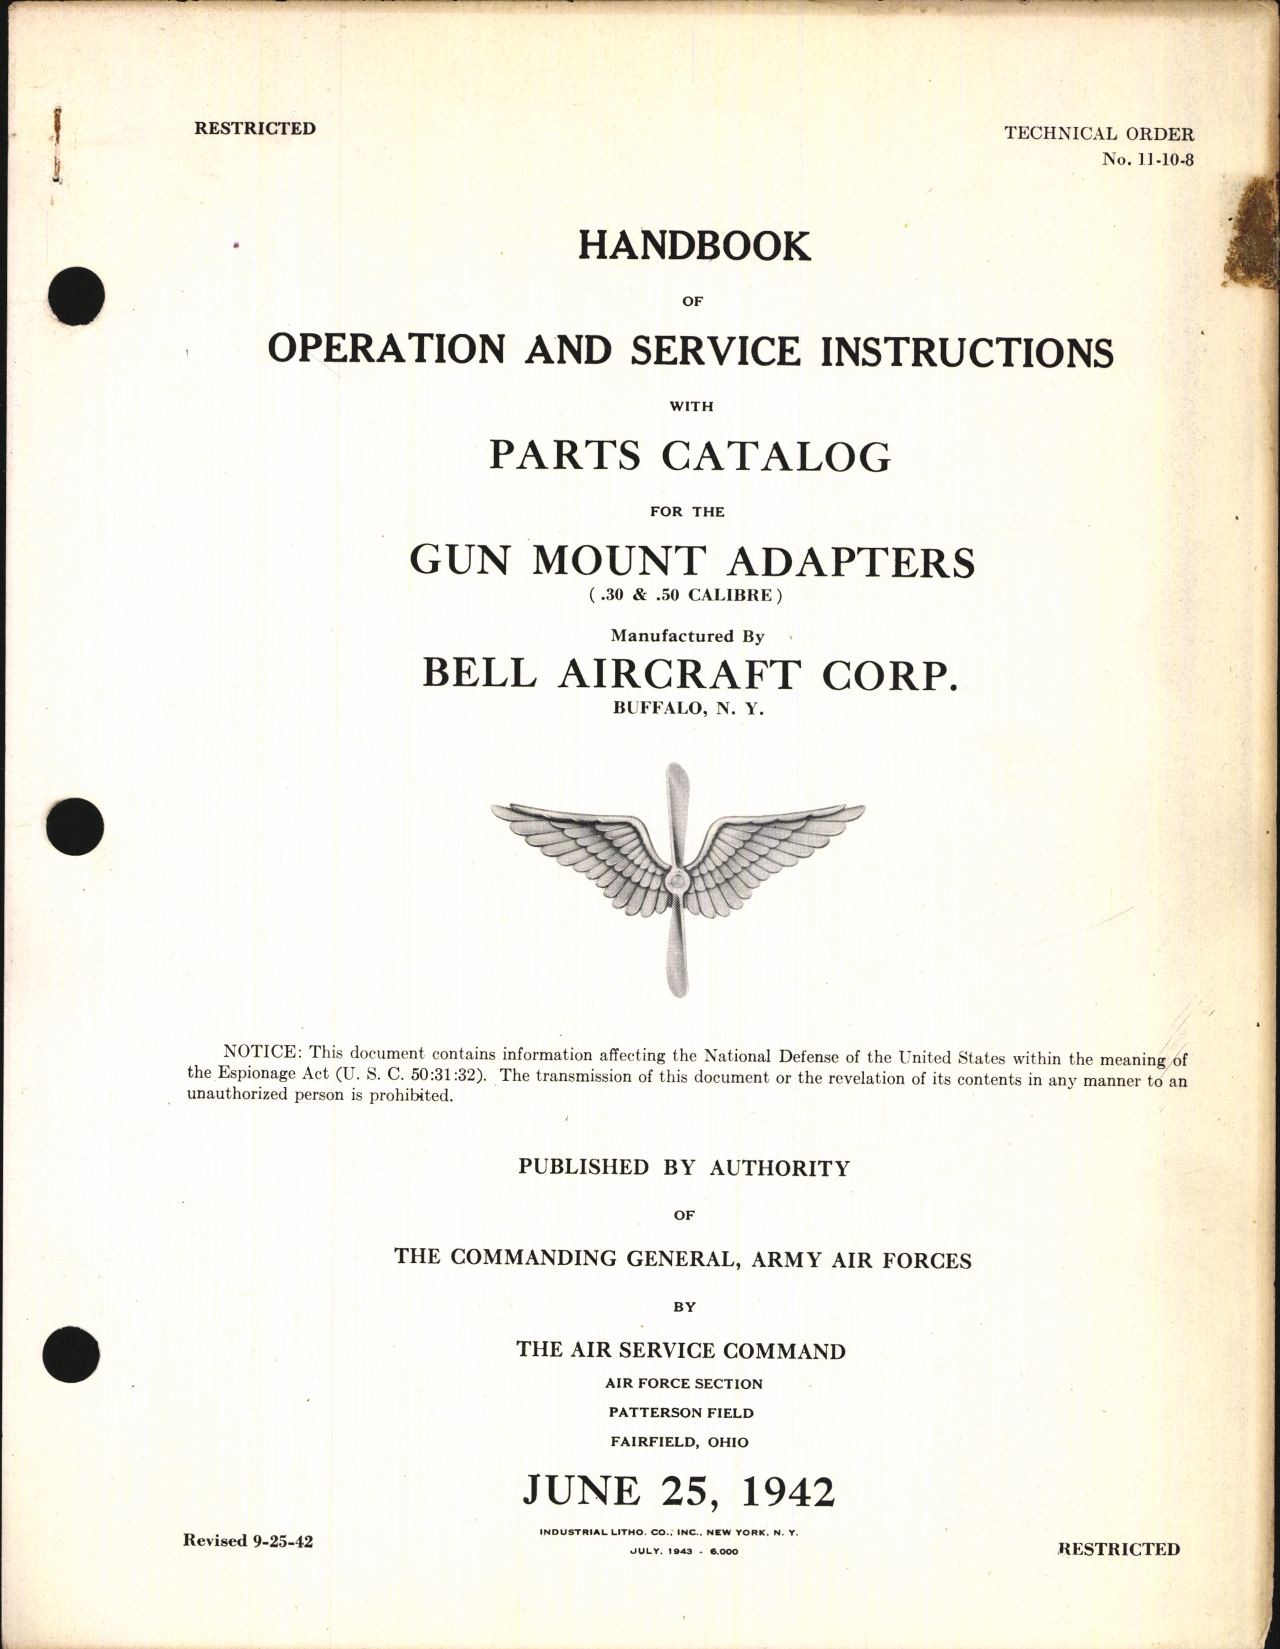 Sample page 1 from AirCorps Library document: Operation and Service Instructions with Parts Catalog for .30 & .50 Caliber Gun Mount Adapters